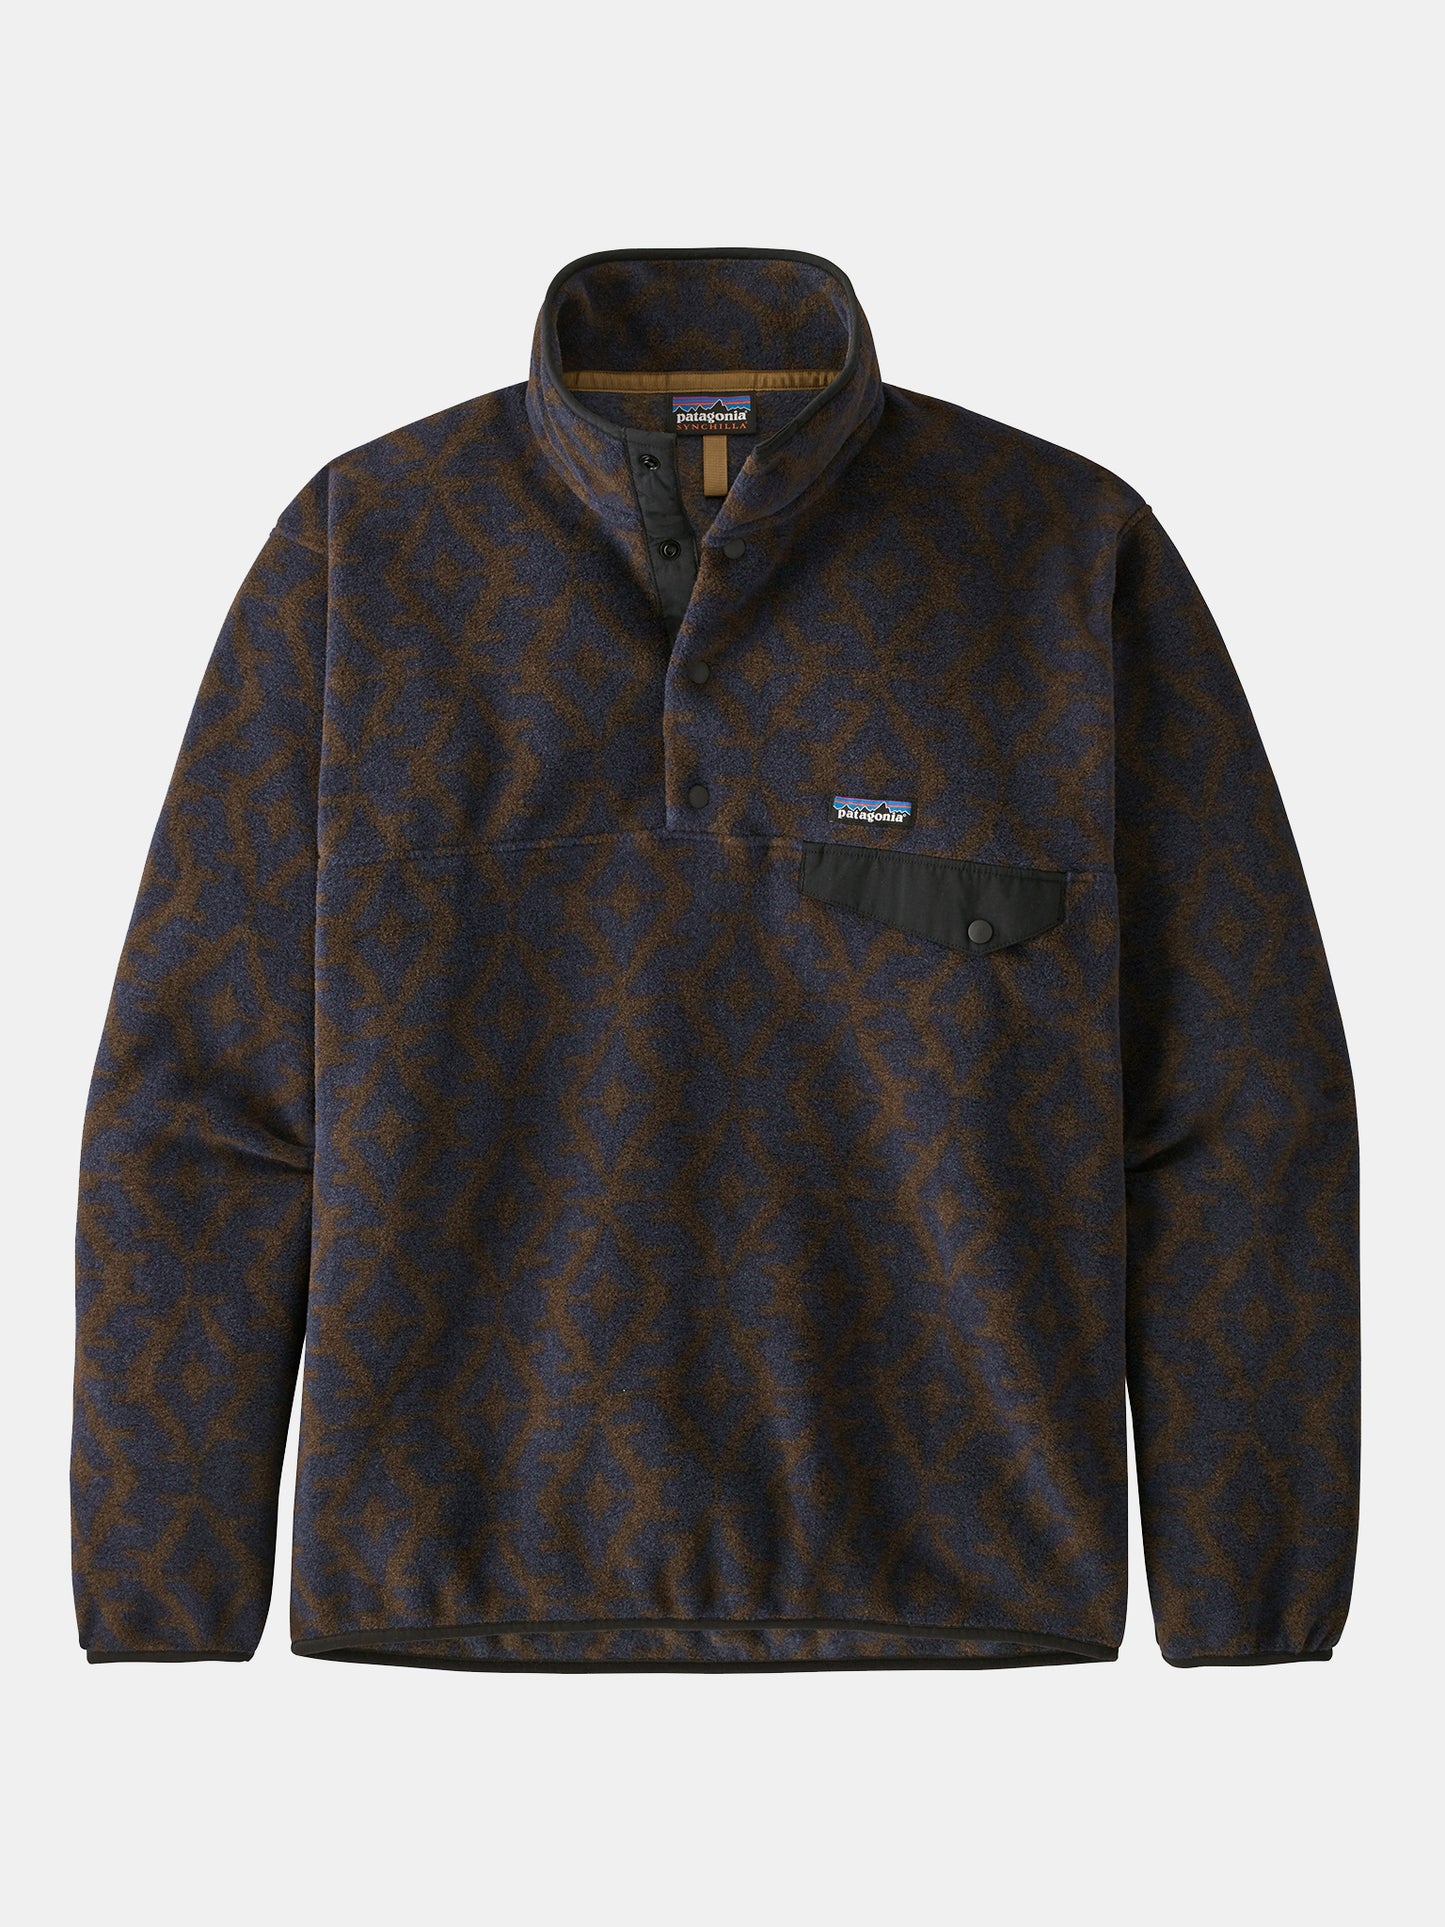 Patagonia Men's Lightweight Synchilla Snap-T